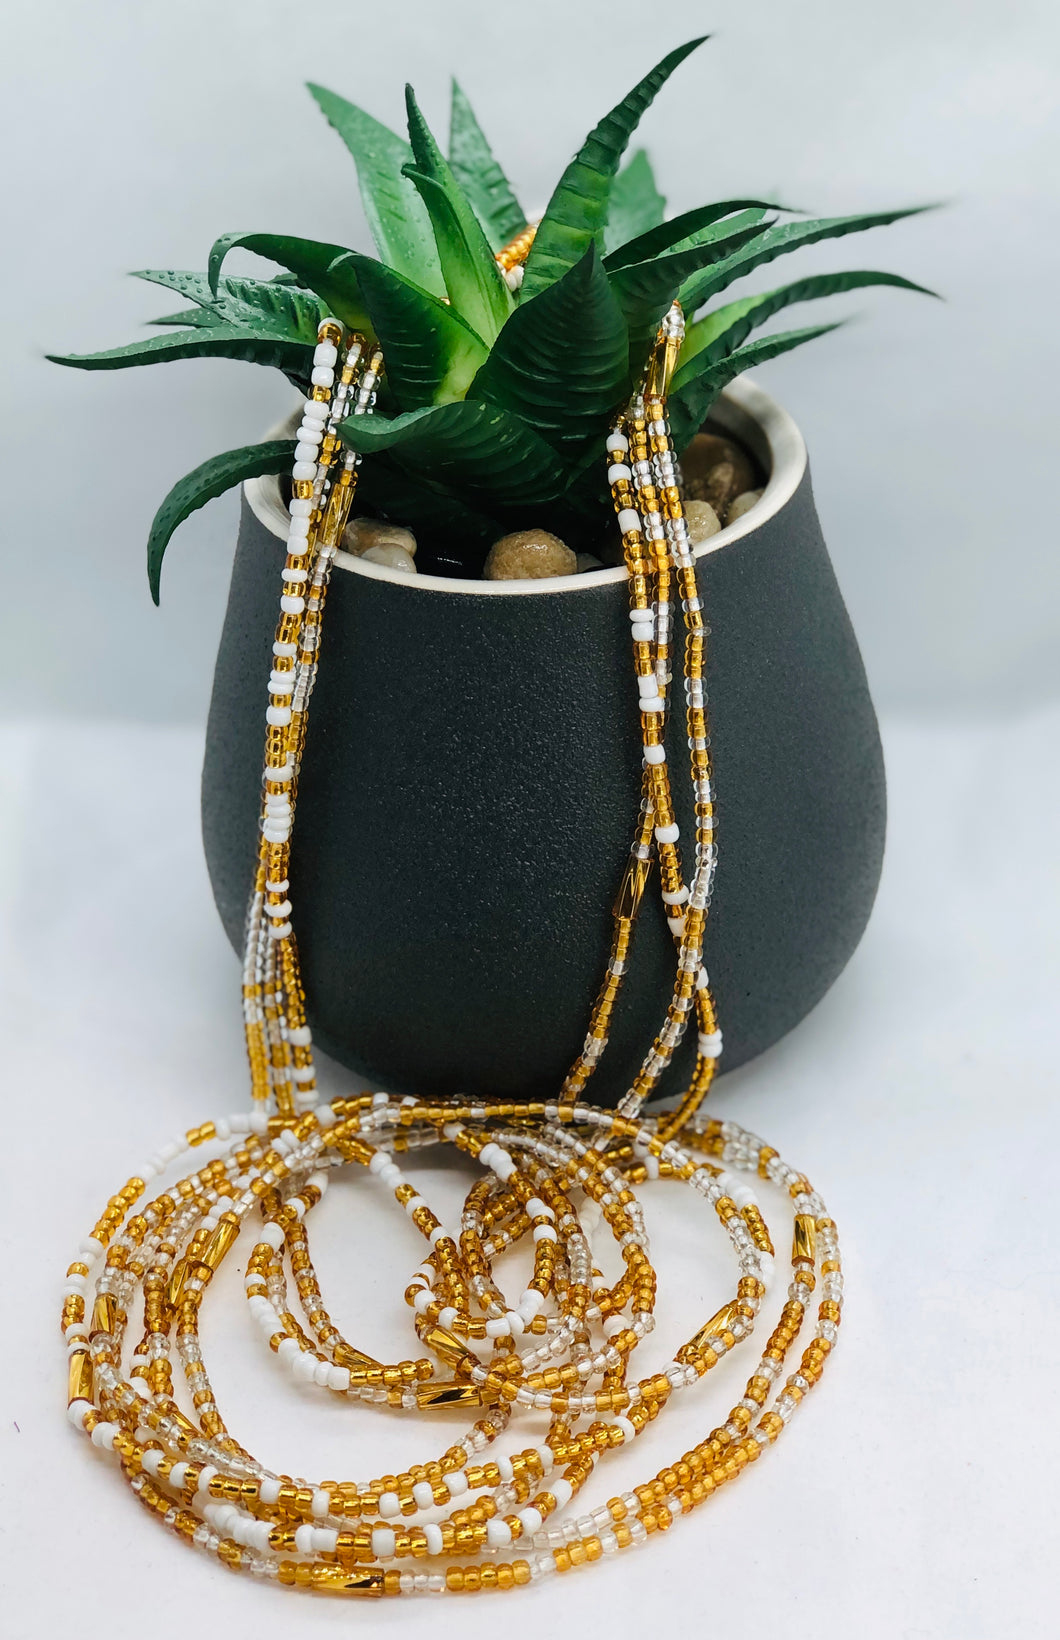 “She has Bling” Tie On Waist Bead Gold, White & Clear Beads